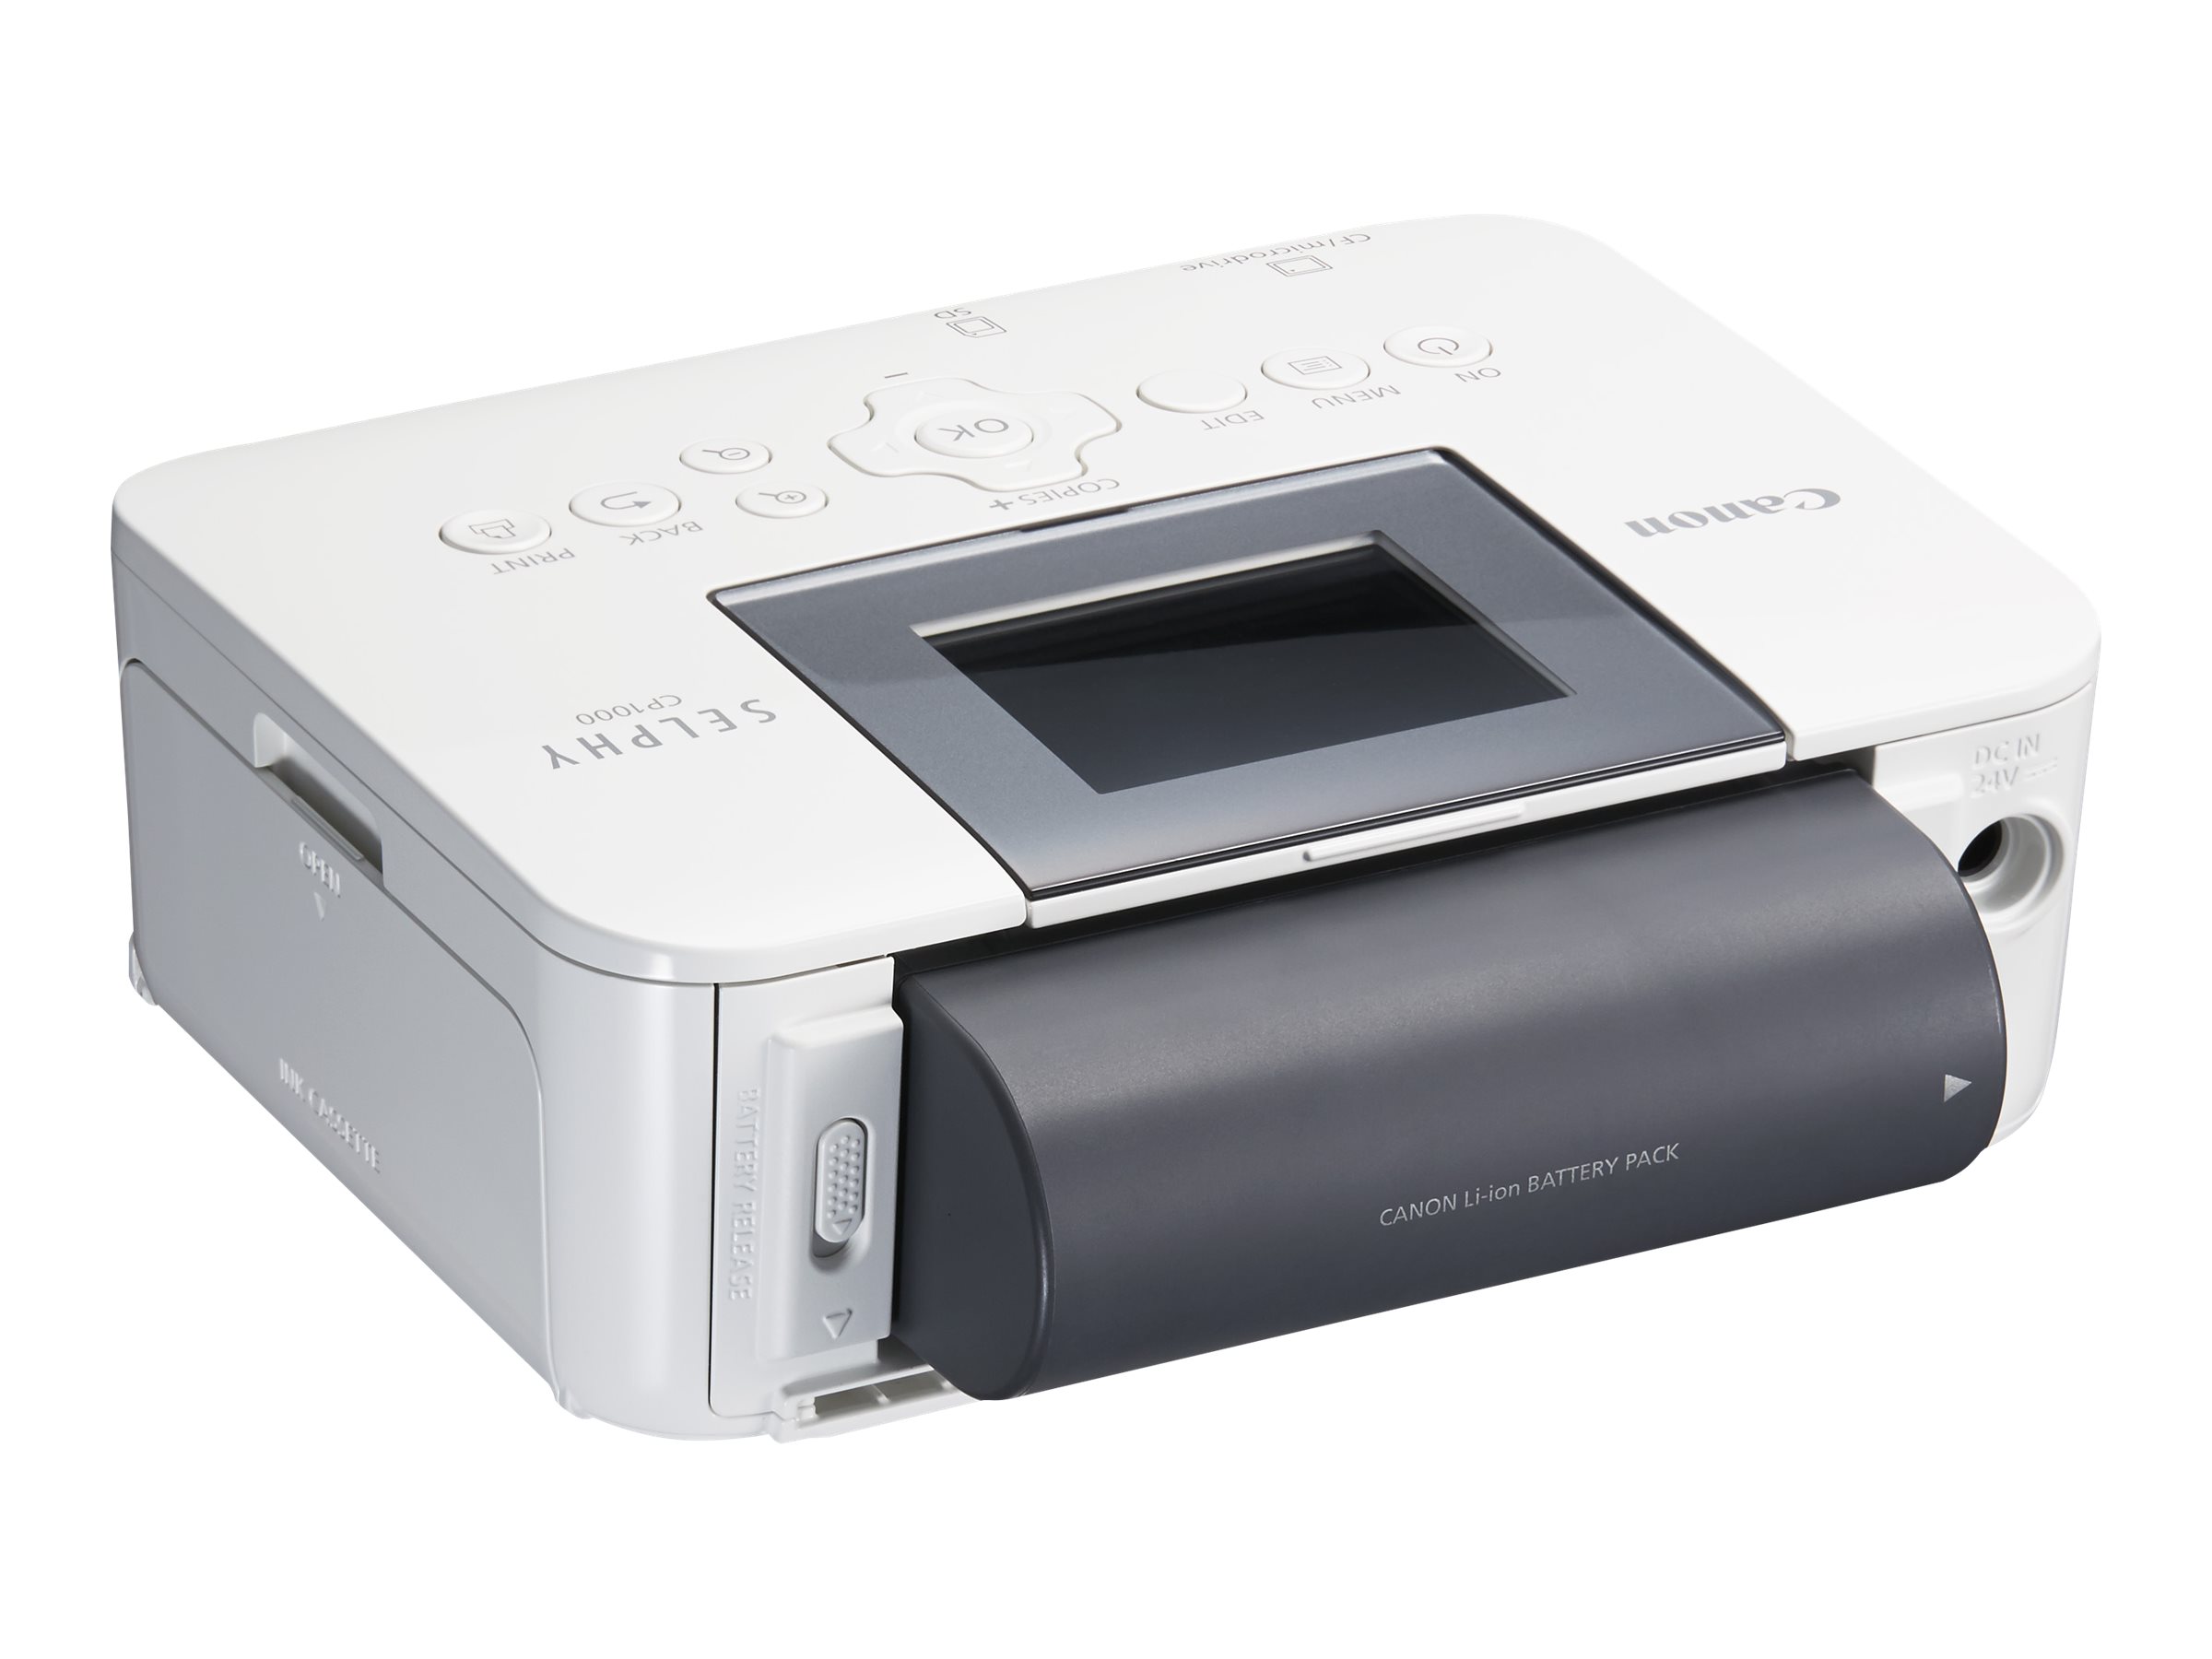 Canon SELPHY CP1000 -Specification - SELPHY Compact Photo Printers